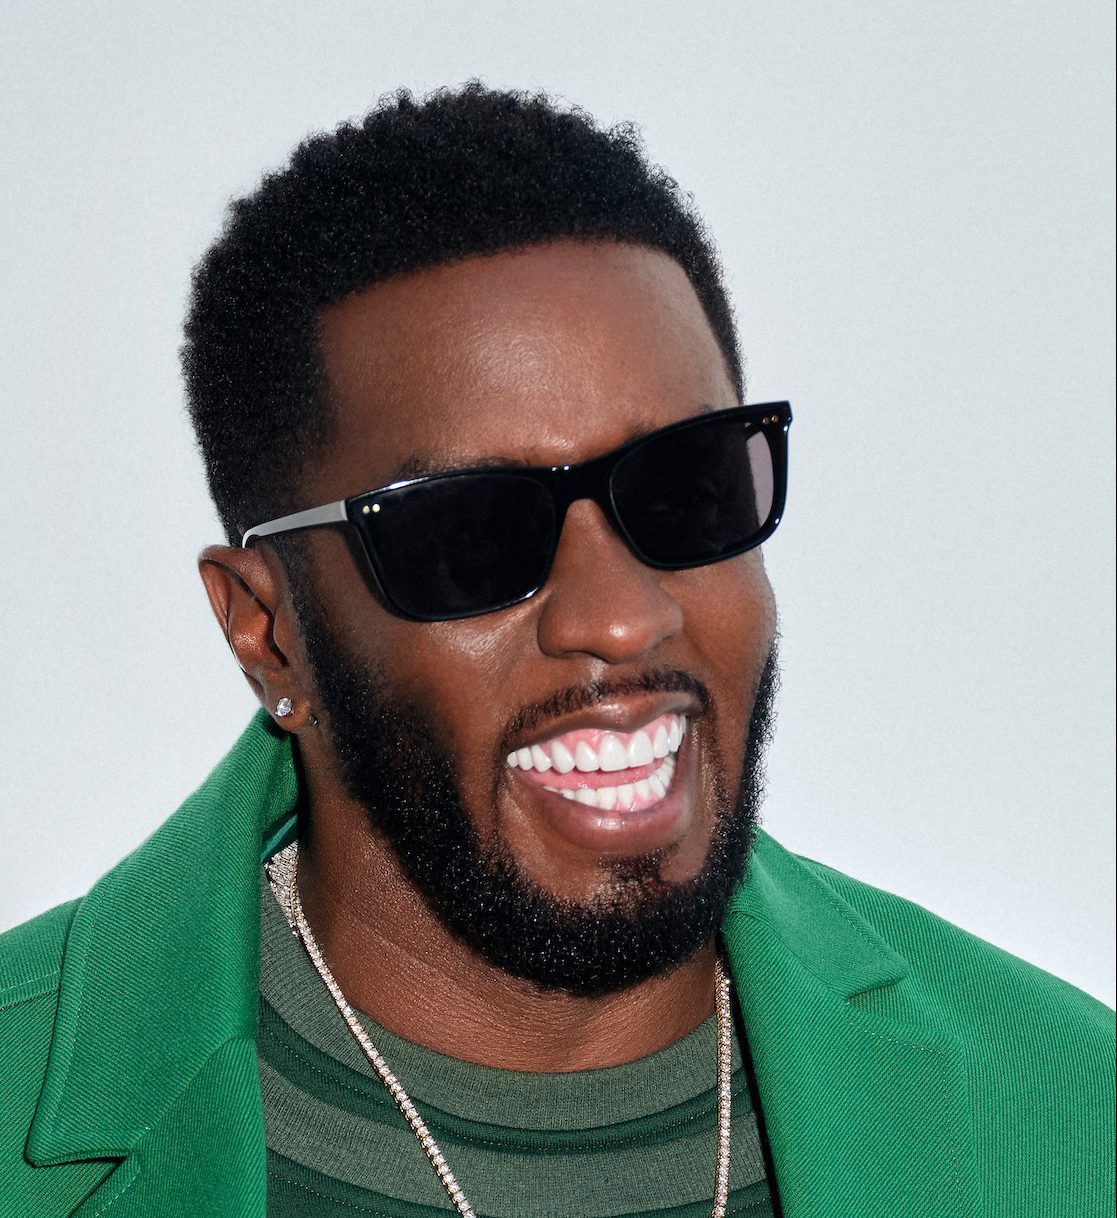 Diddy Love Returns With His Latest Single 